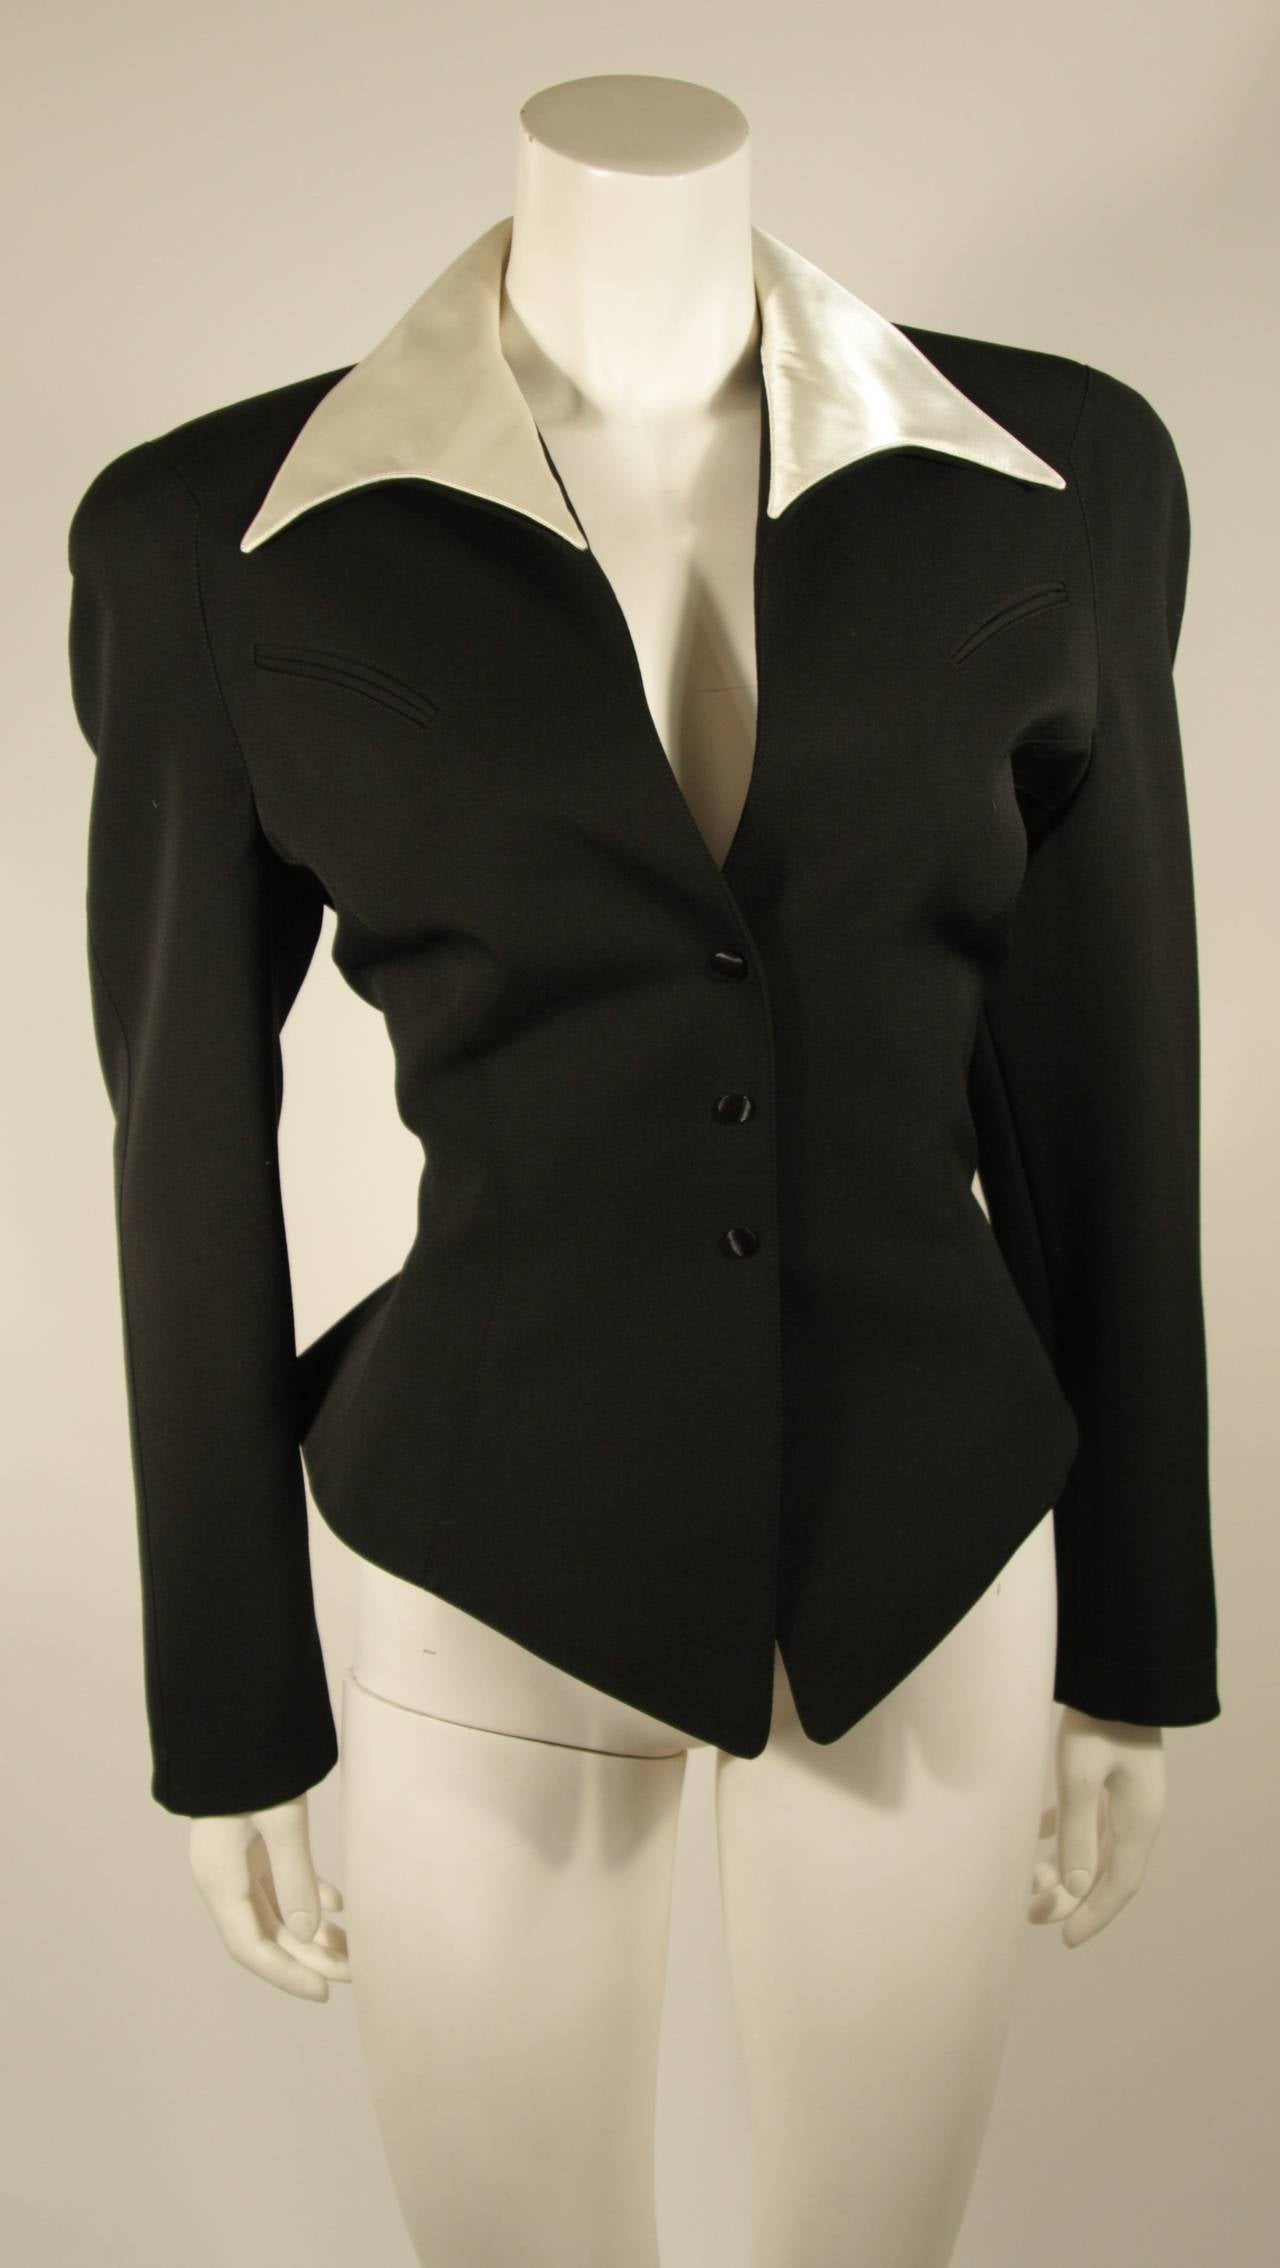 This exceptional Thierry Mugler design is available for viewing at our Beverly Hills Boutique. The jacket has a western influence. It is composed of a black fabric and features a double collar which is topped with an off white silk. Exceptional